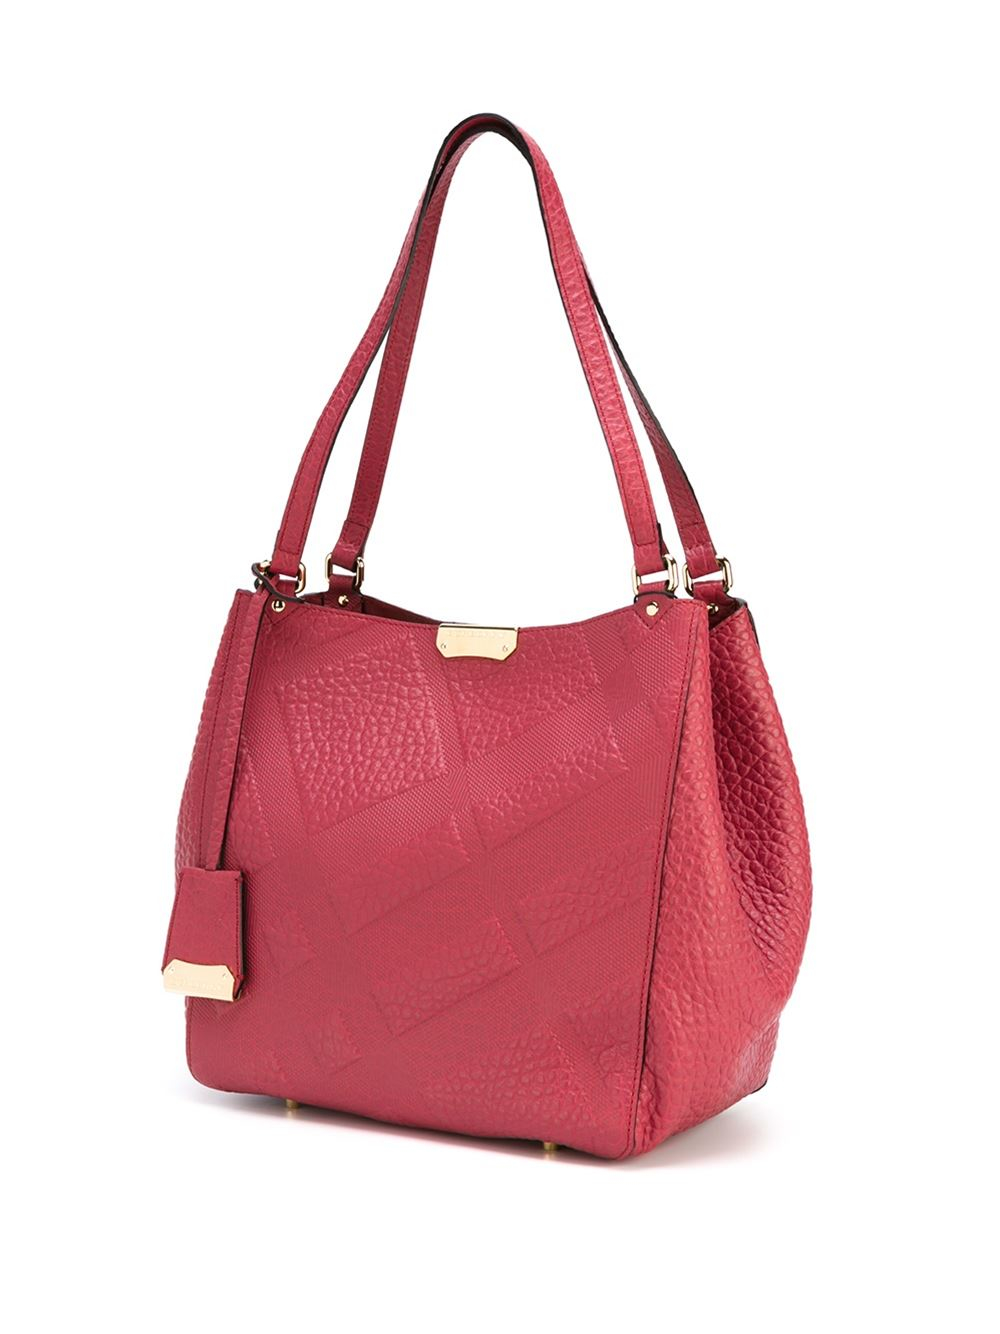 Burberry Leather Embossed Check Tote in Pink & Purple (Pink) - Lyst